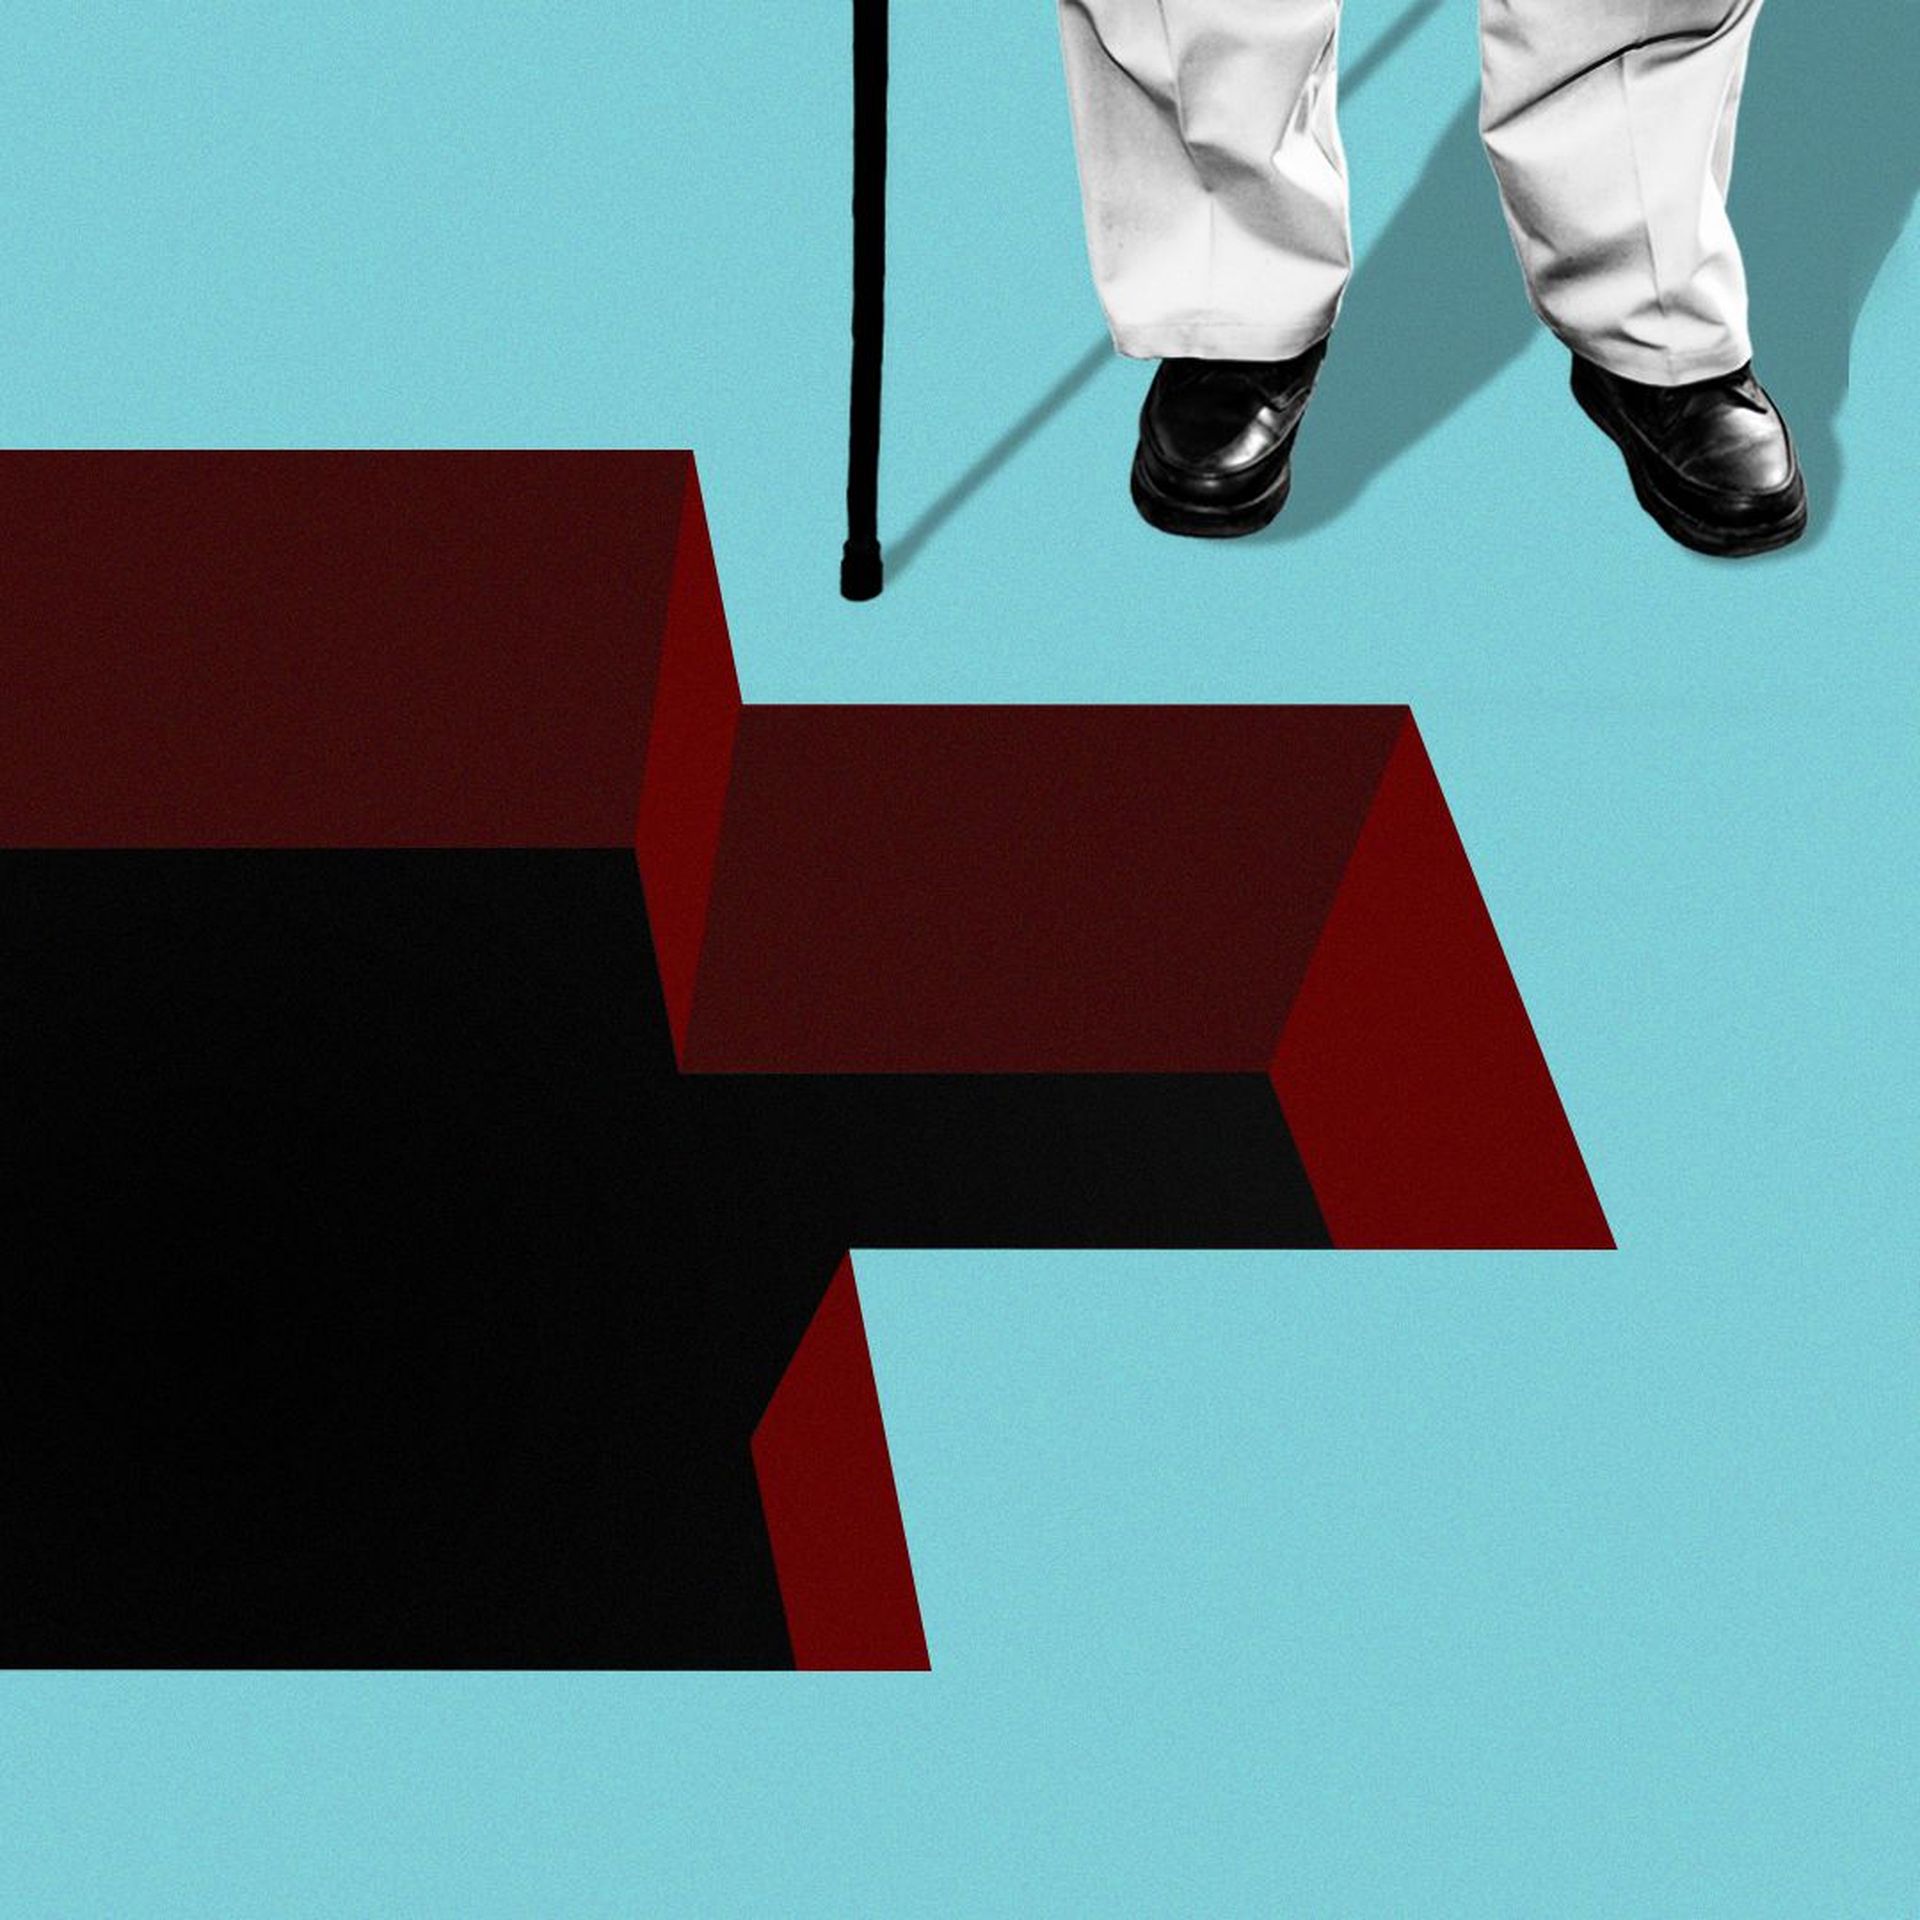 Illustration of a person with a cane near a hole shaped like a red cross symbol.